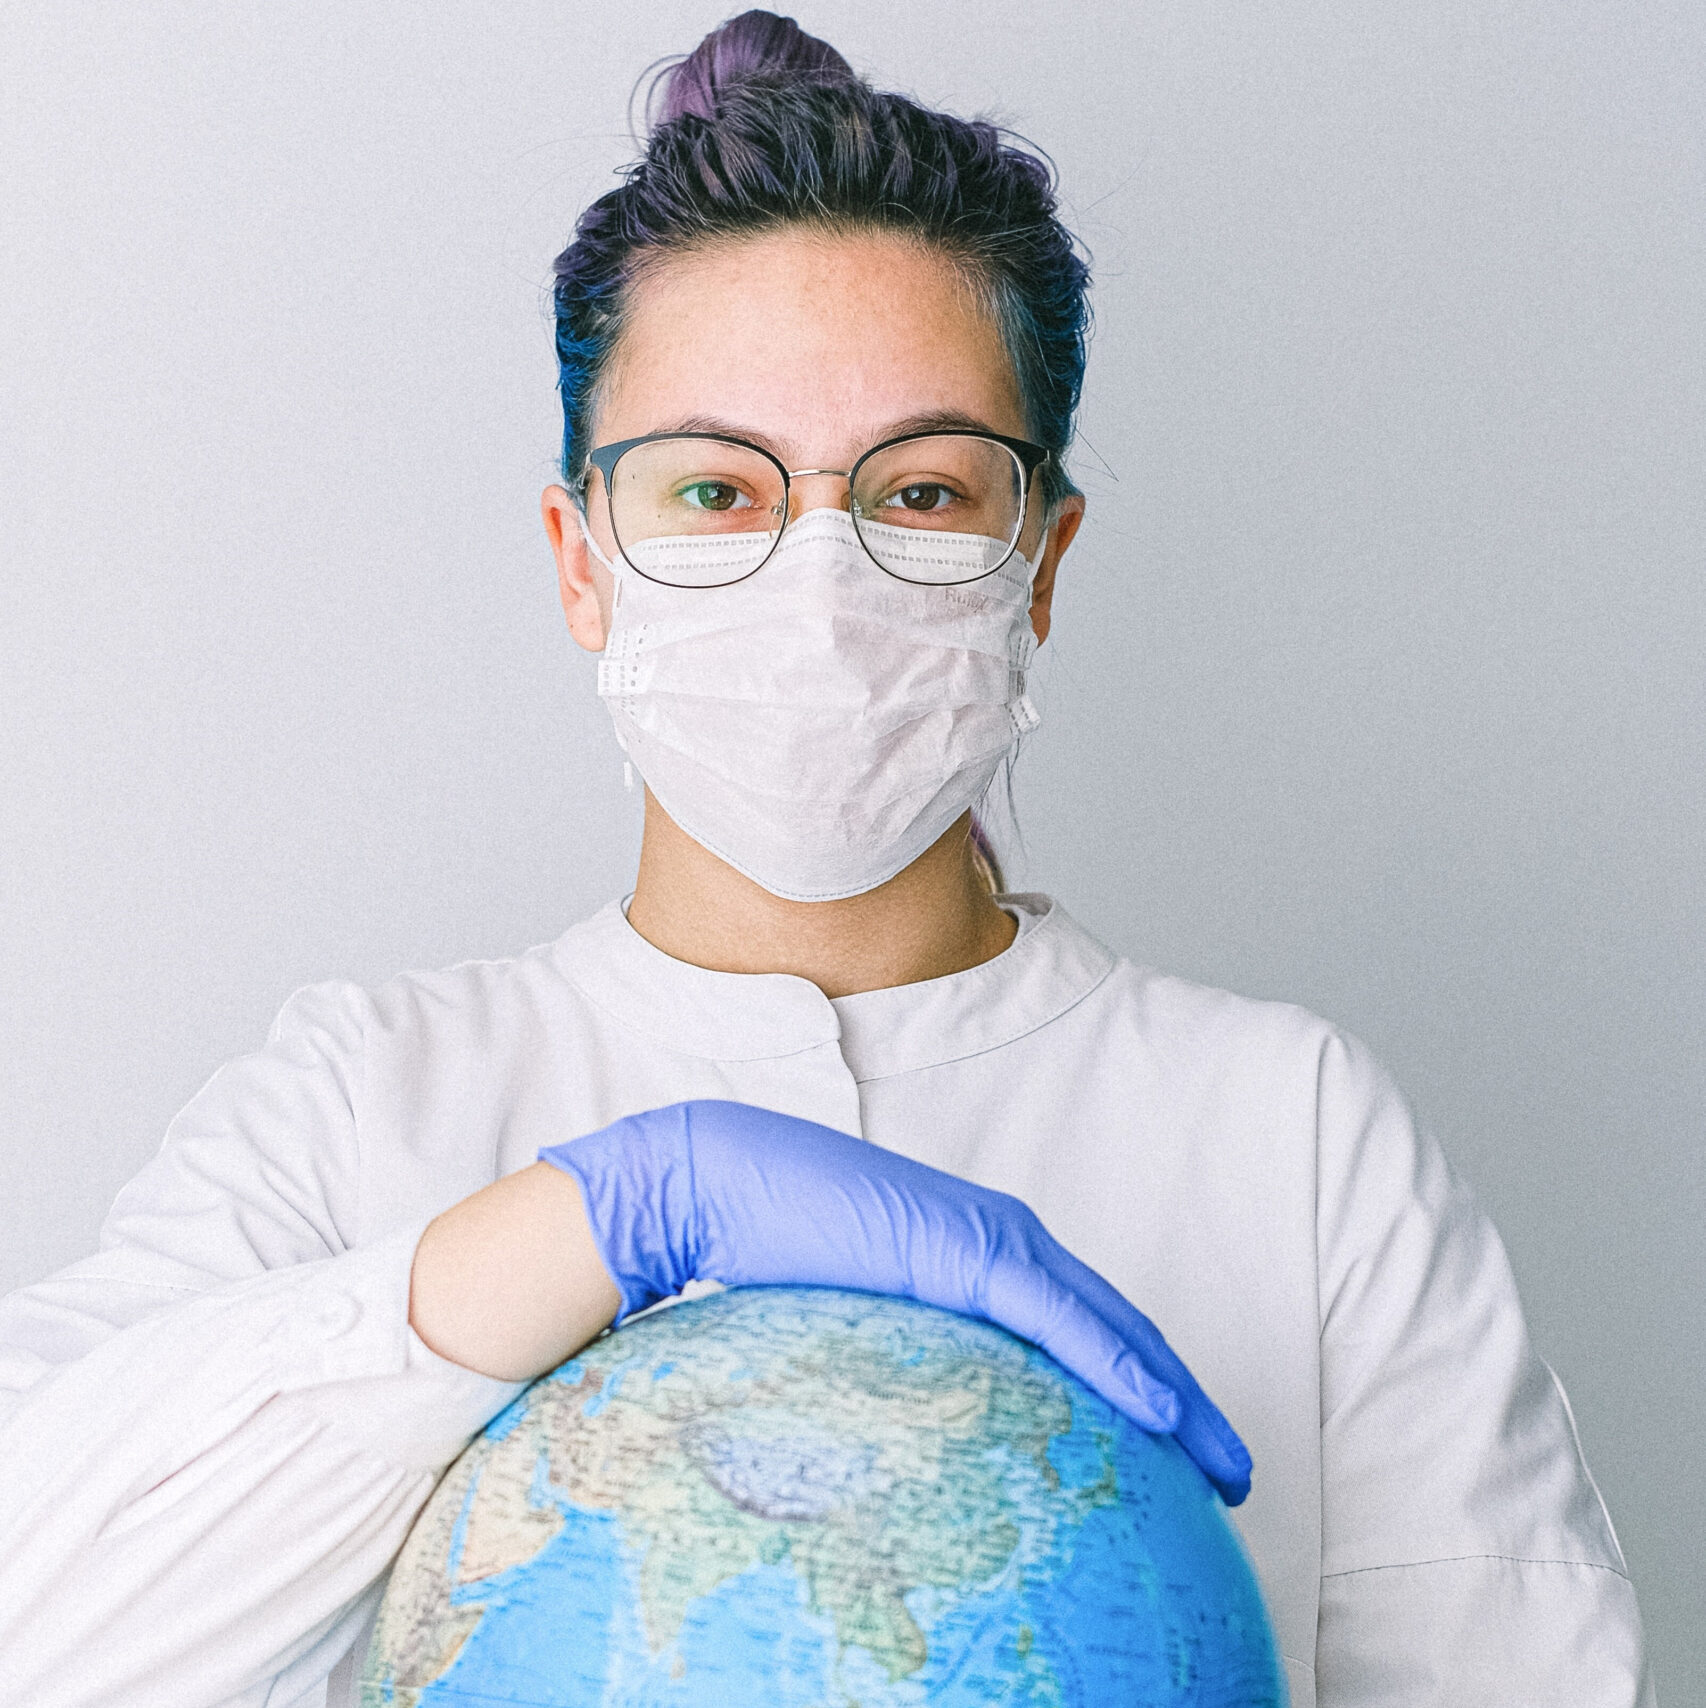 Woman in face mask, gloves, and surgical scrubs holding globe